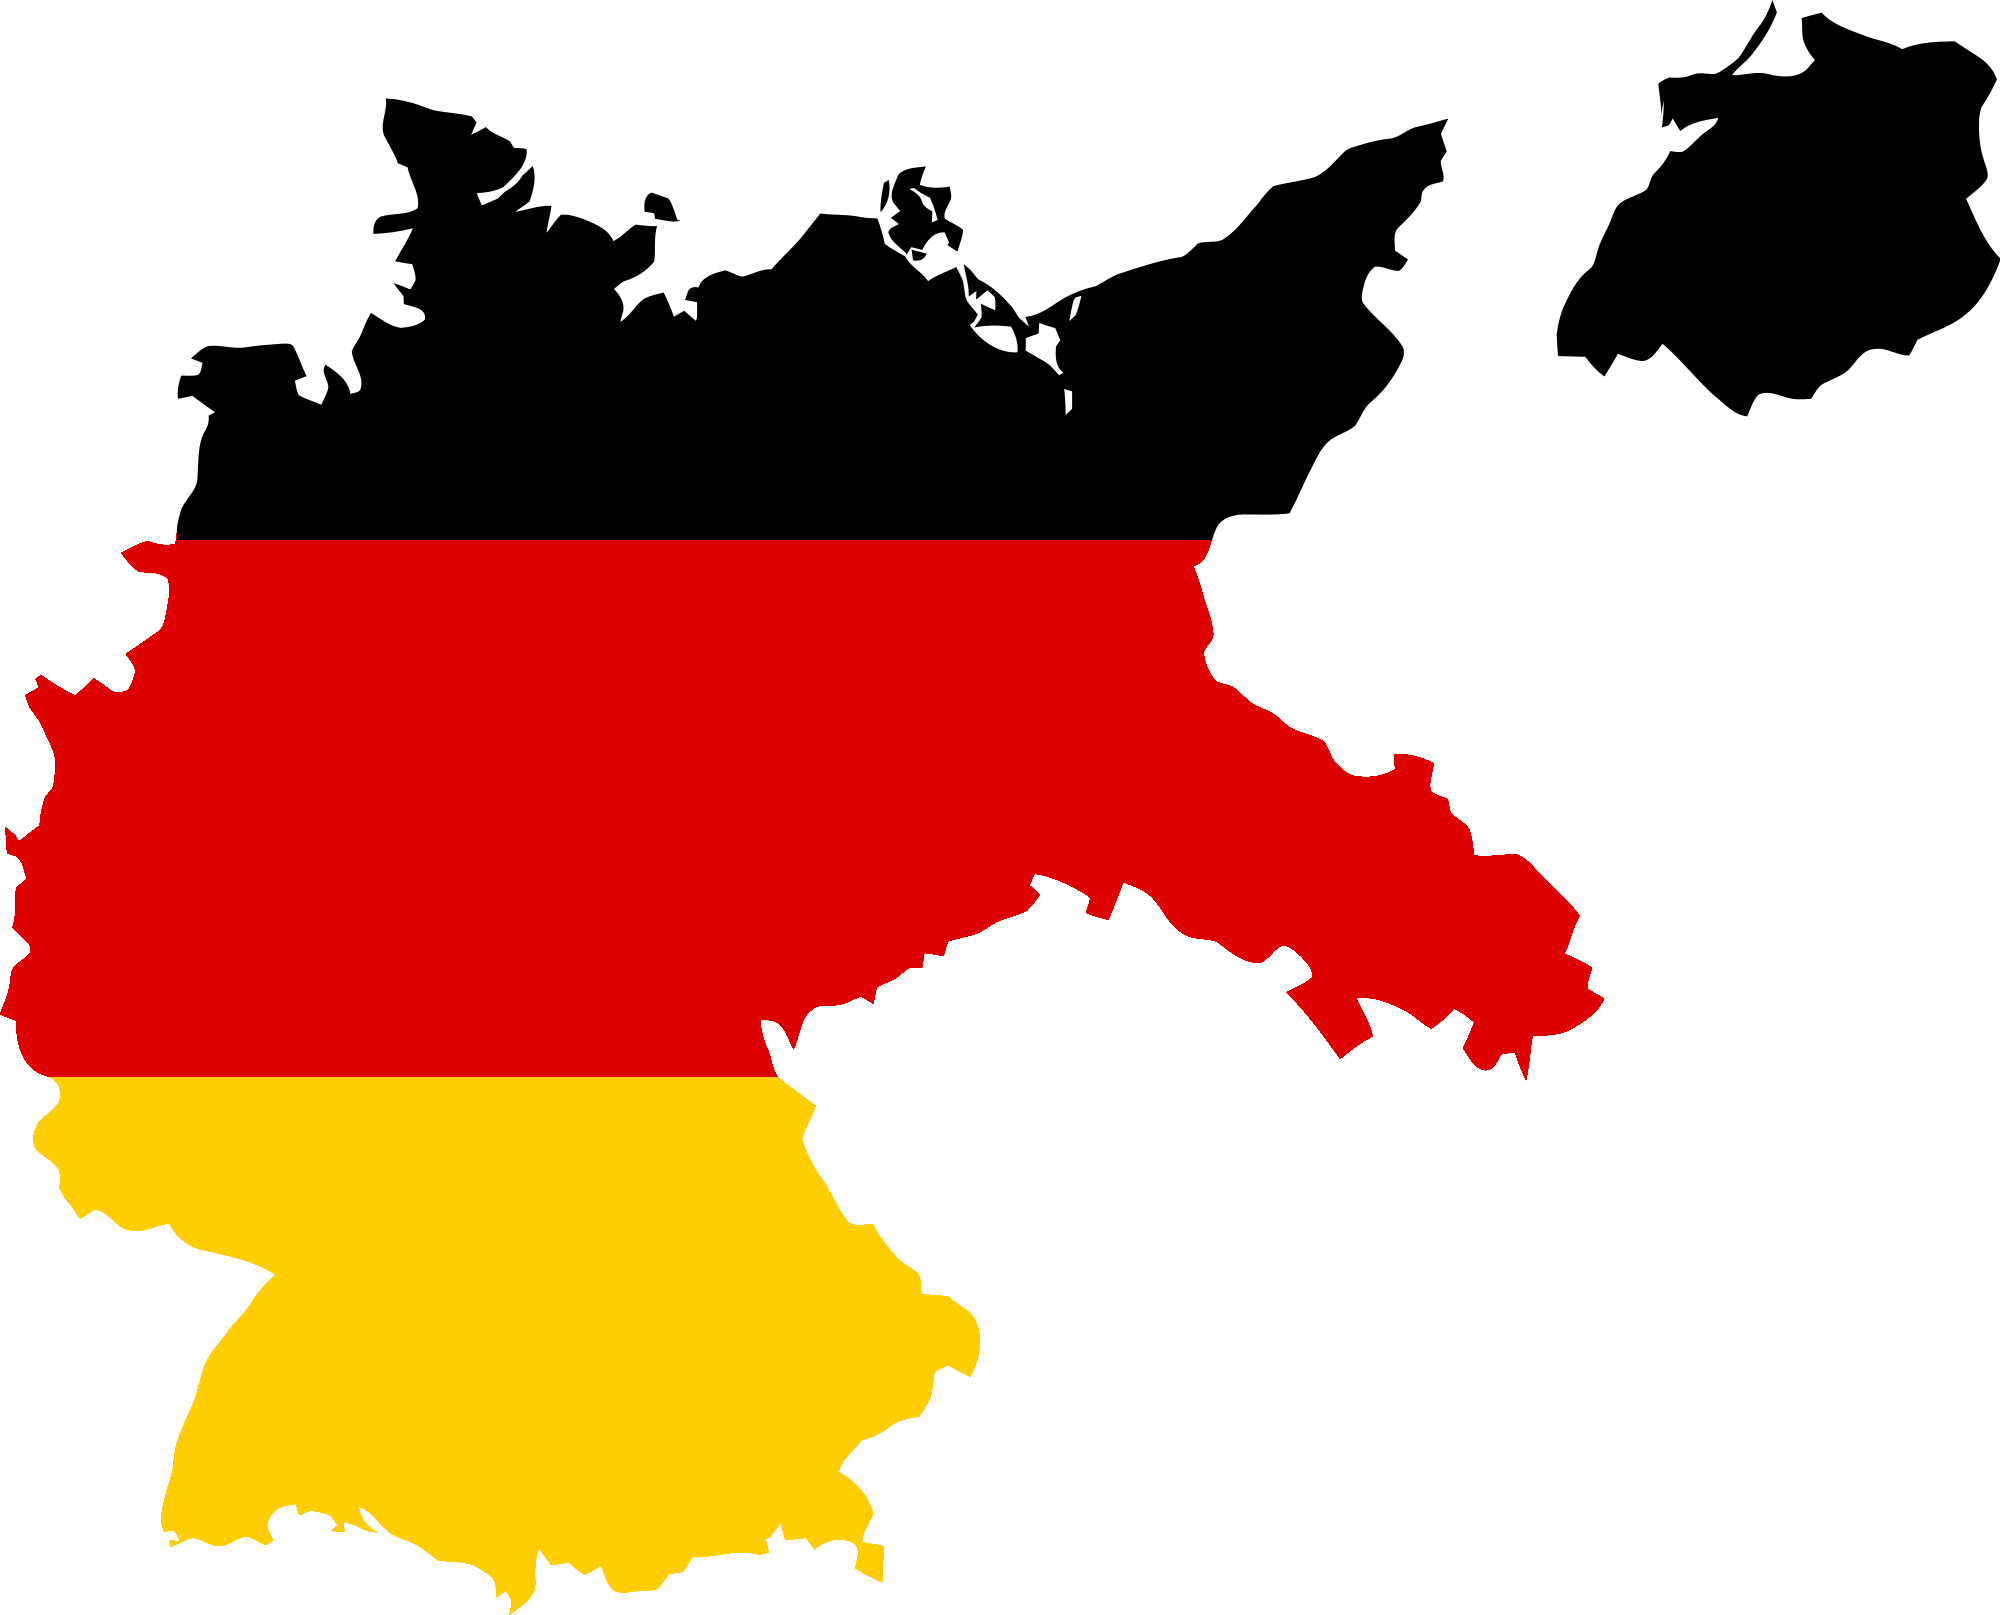 Weimar Republic flag map. Germany map, Germany flag, Flags wallpaper